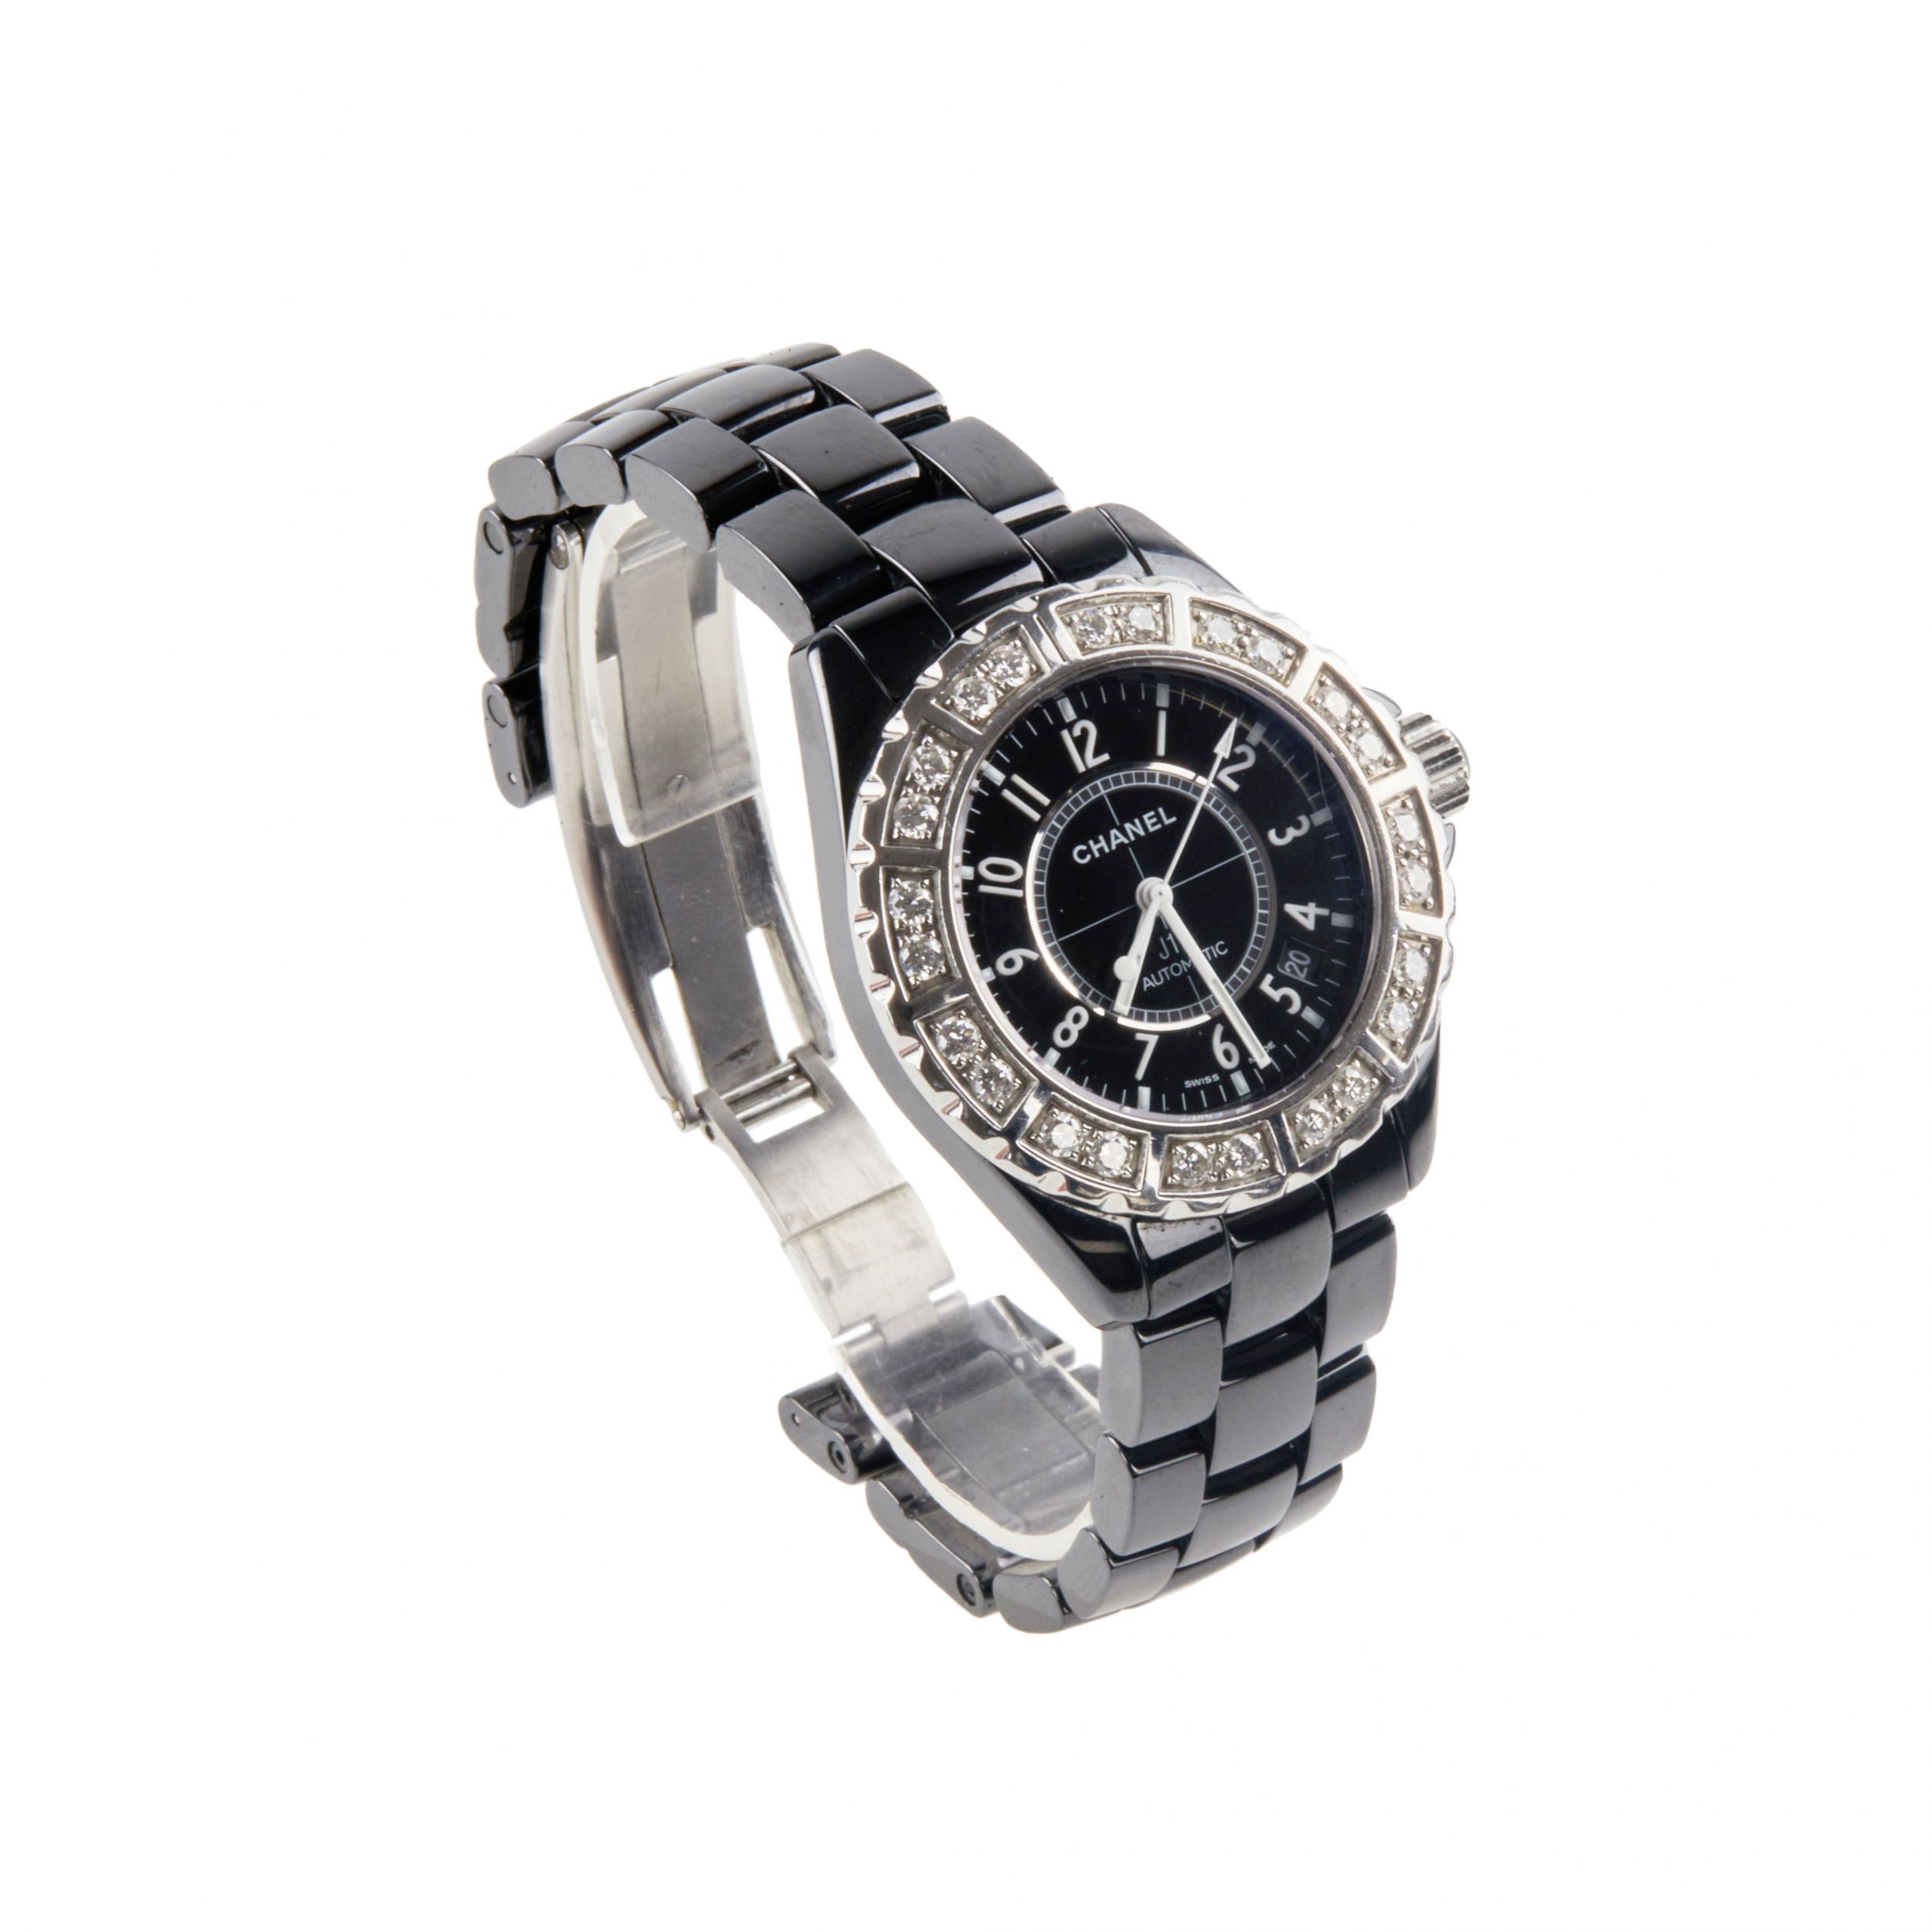 CHANEL J12 Classic Unisex Watch H1174. - Image 2 of 6